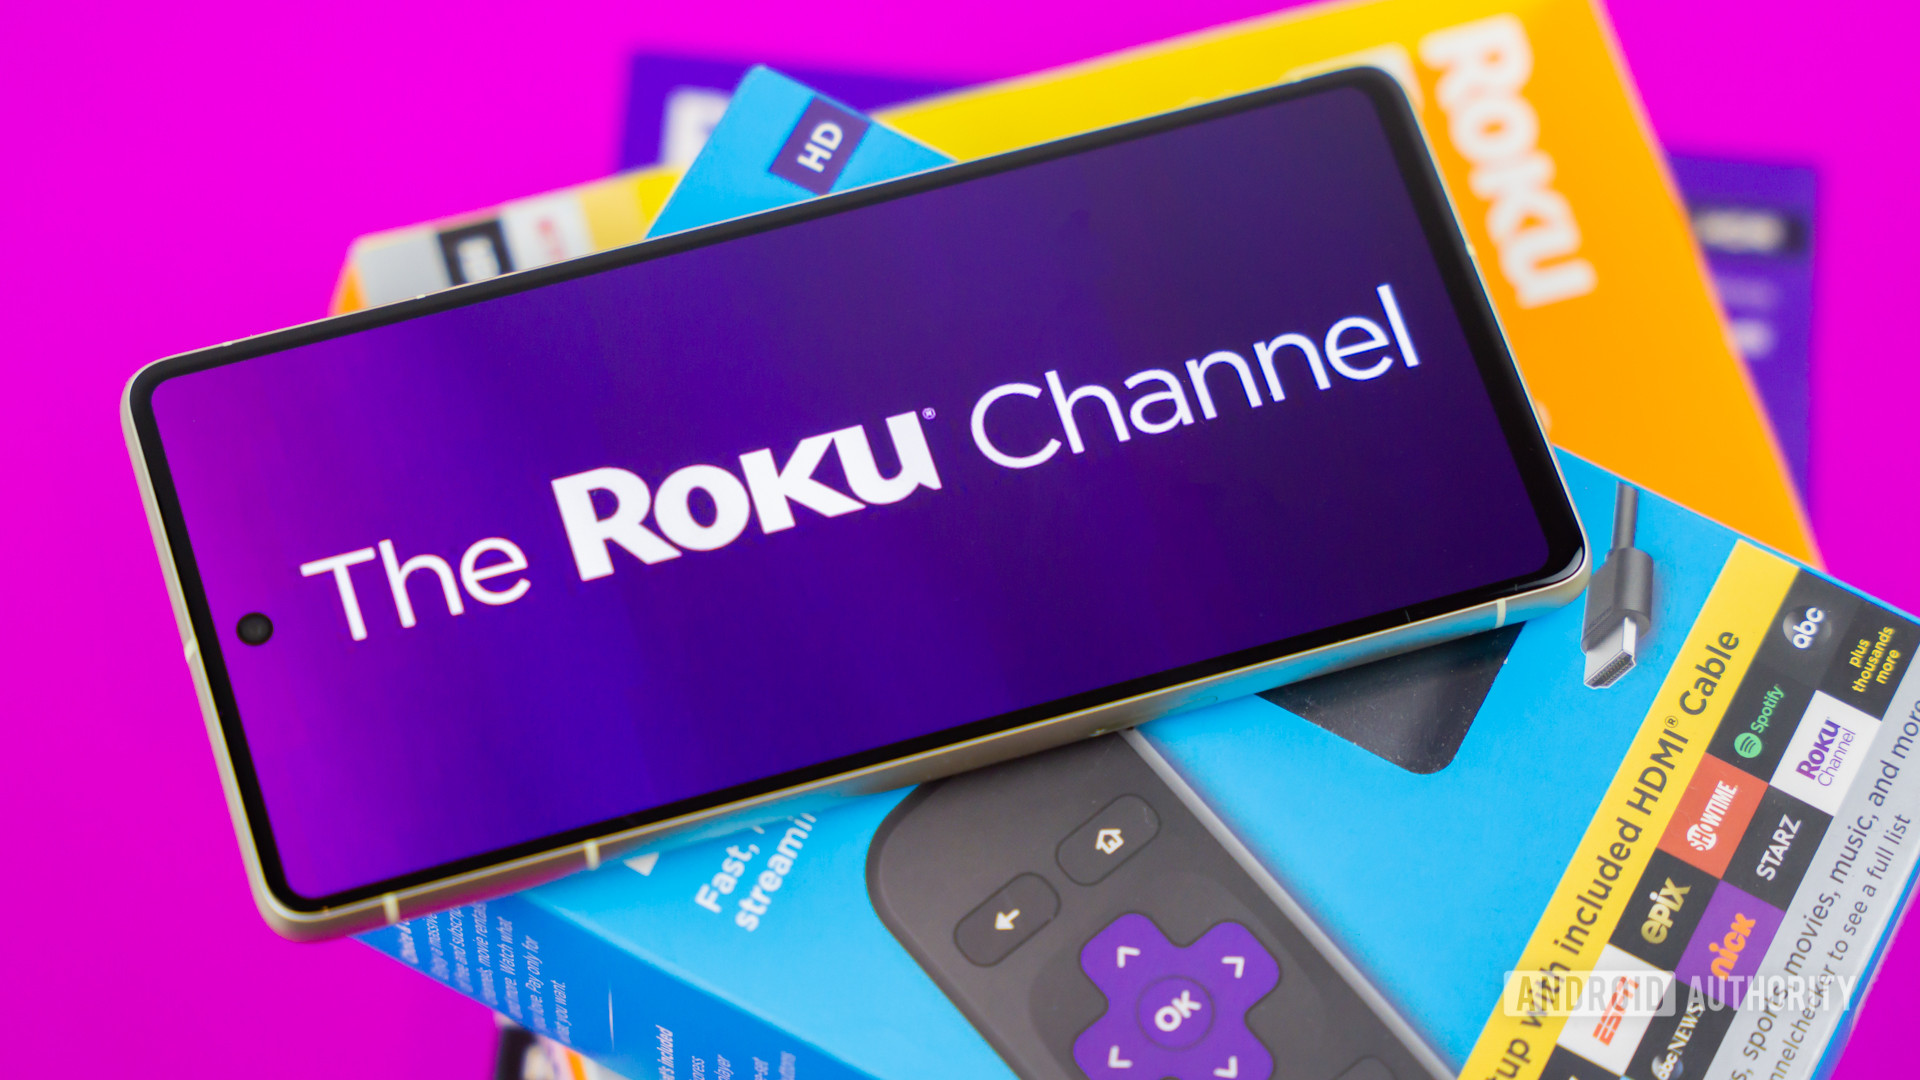 Stock photo of The Roku Channel logo on phone next to Roku boxes 7